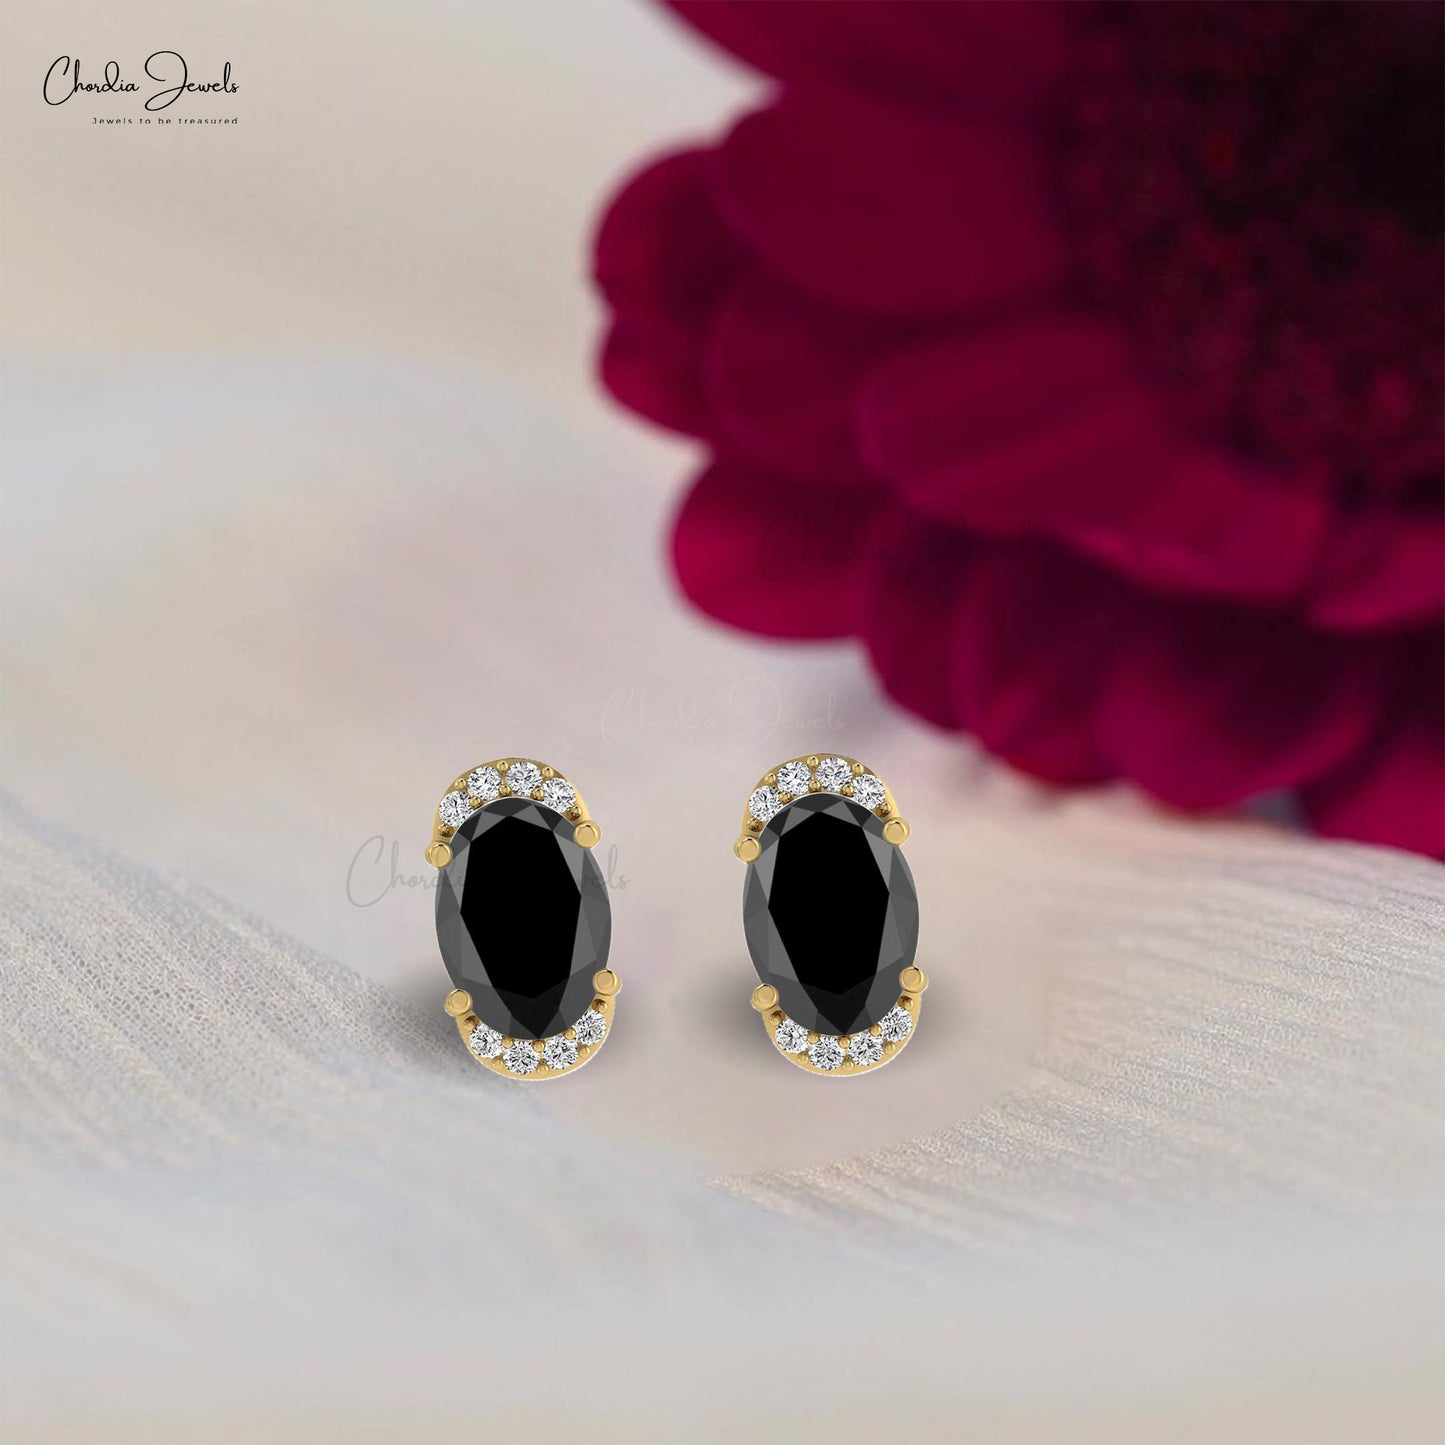 Genuine Black Diamond Pave Set Earrings 7x5mm Oval Cut Natural Gemstone Half Halo Studs 14k Real Gold G-H Diamond Grace Jewelry For Surprise Gift